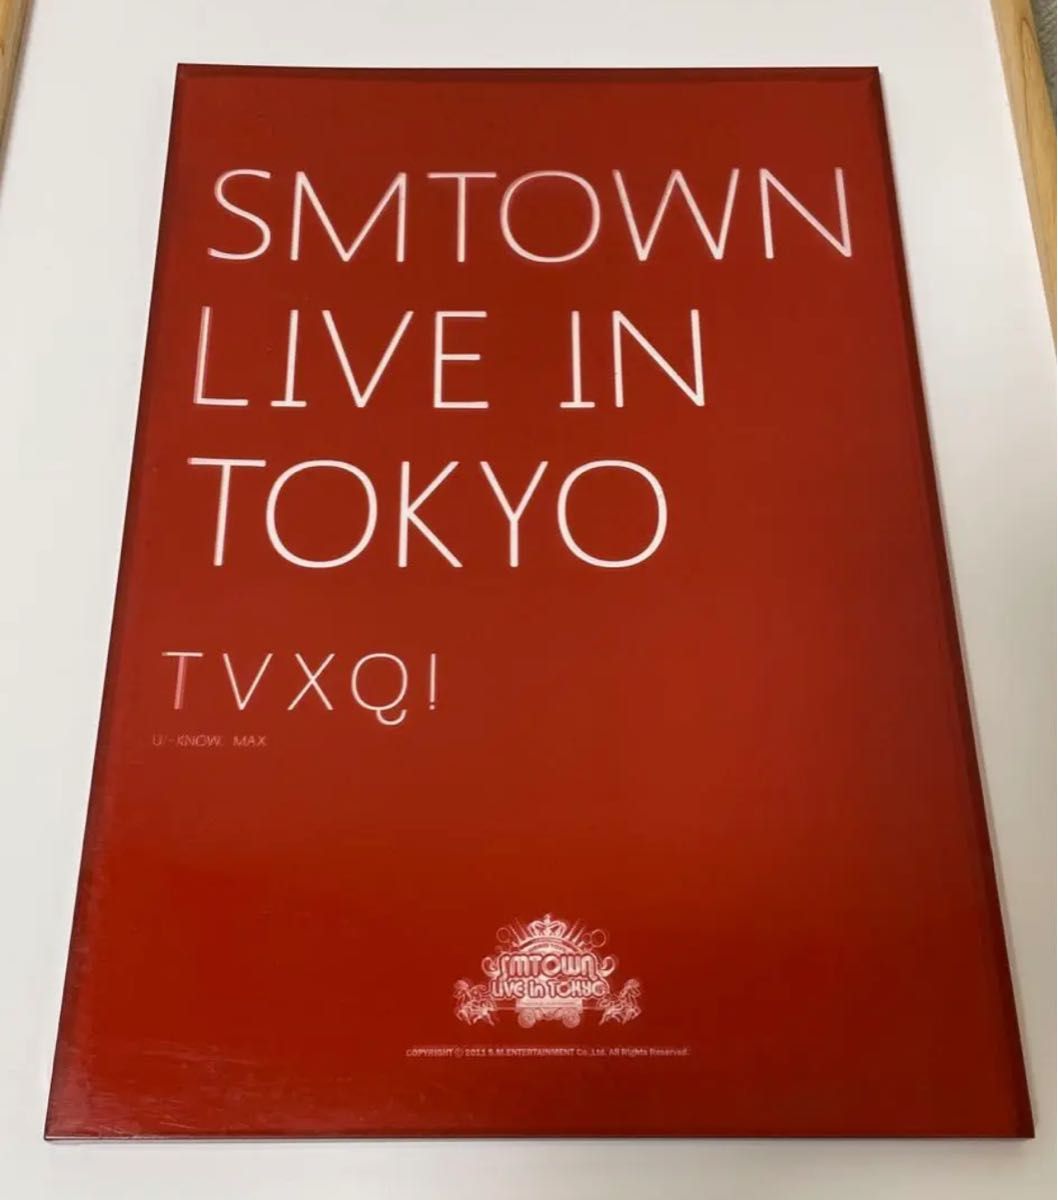 TVXQ SMTOWN LIVE IN TOKYO フェースブック｜PayPayフリマ